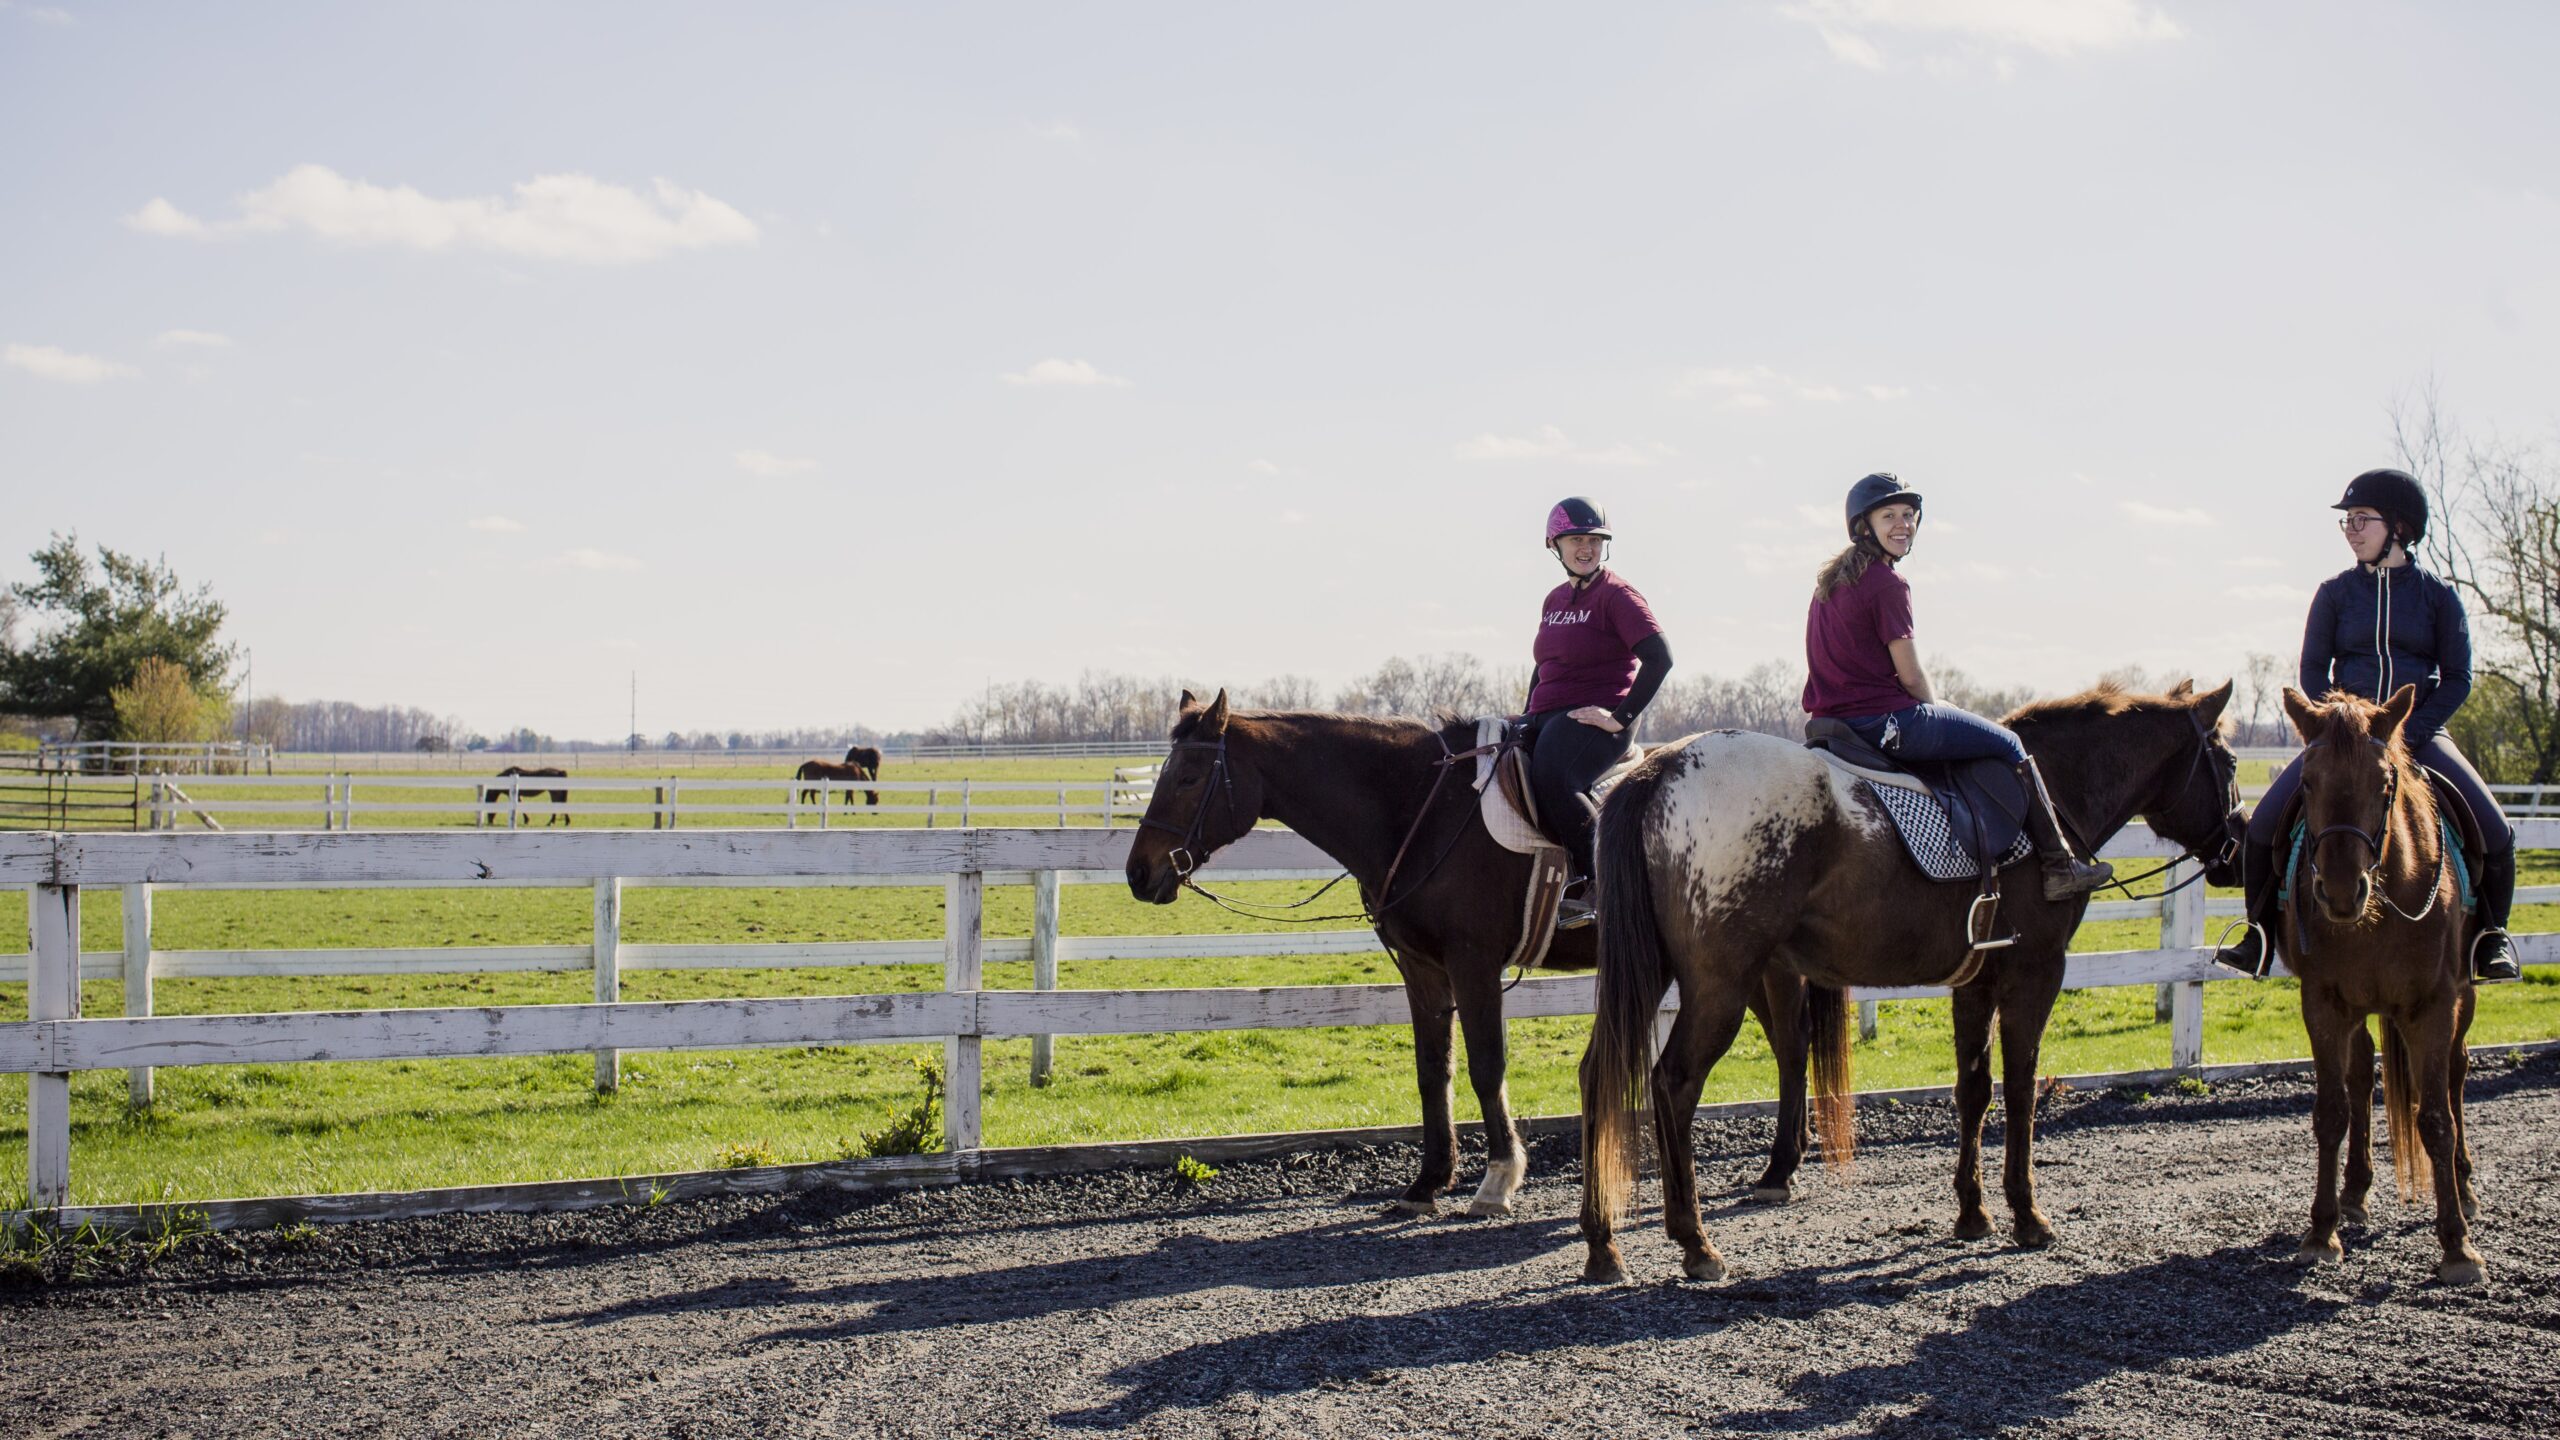 Members of the equestrian program enjoying a beautiful spring day on horses.